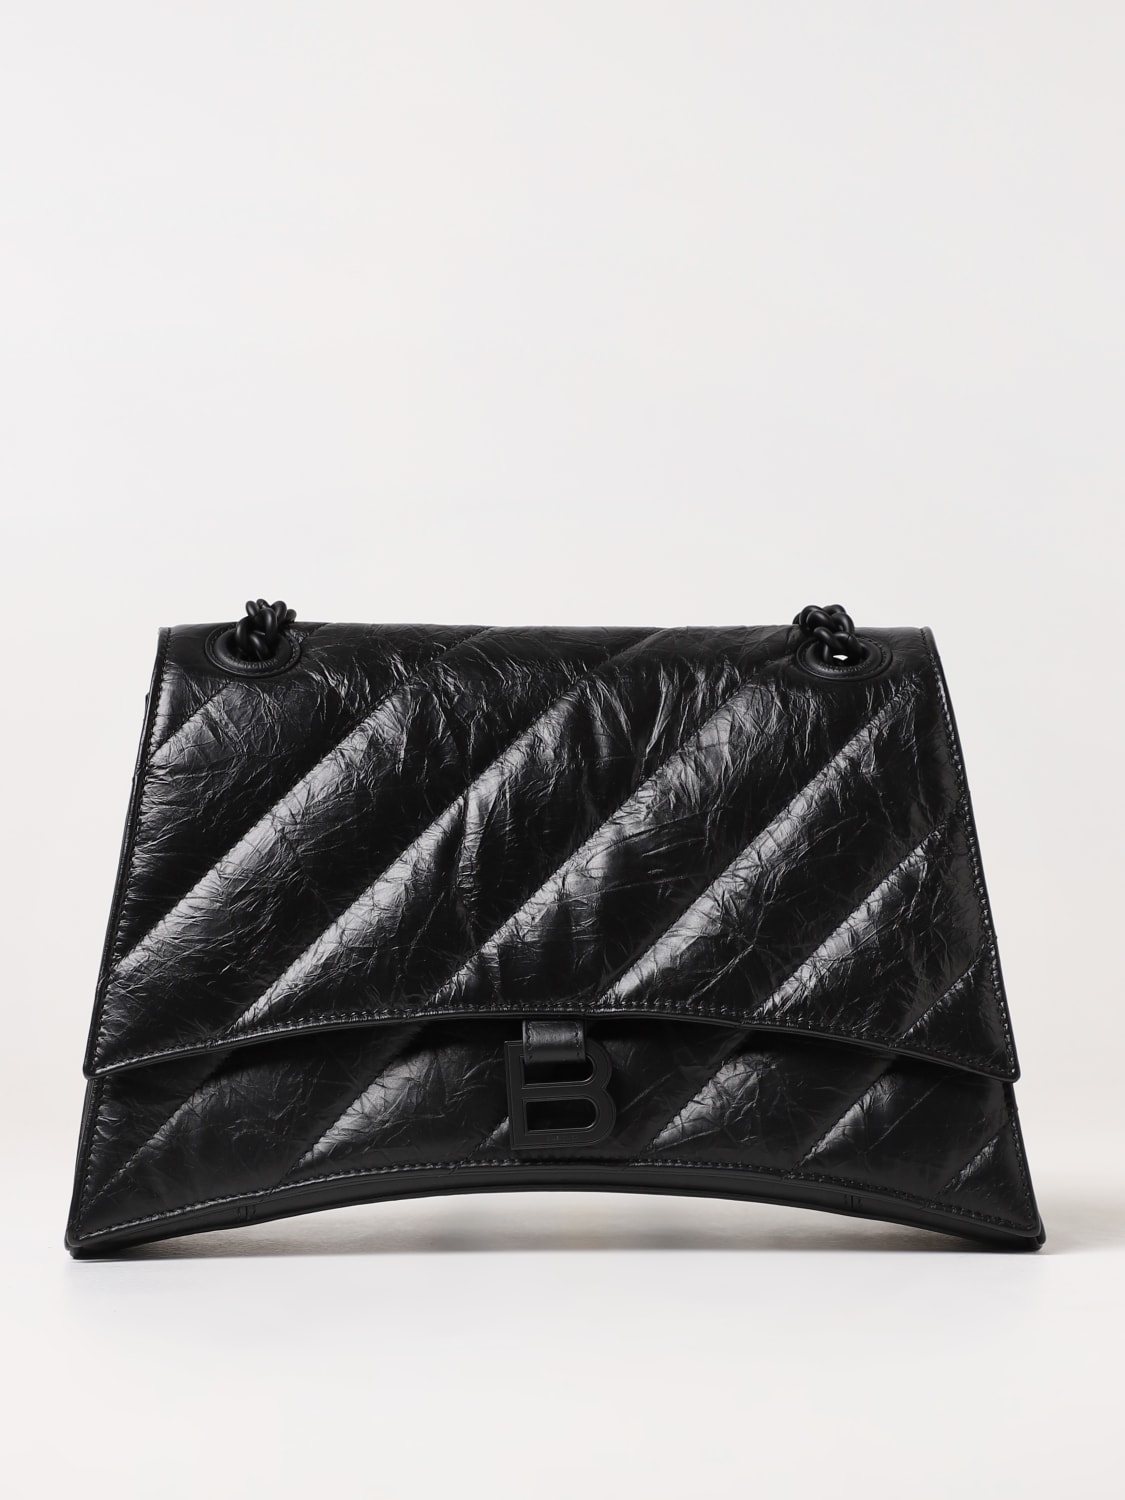 Balenciaga Crush Quilted Leather Shoulder Bag